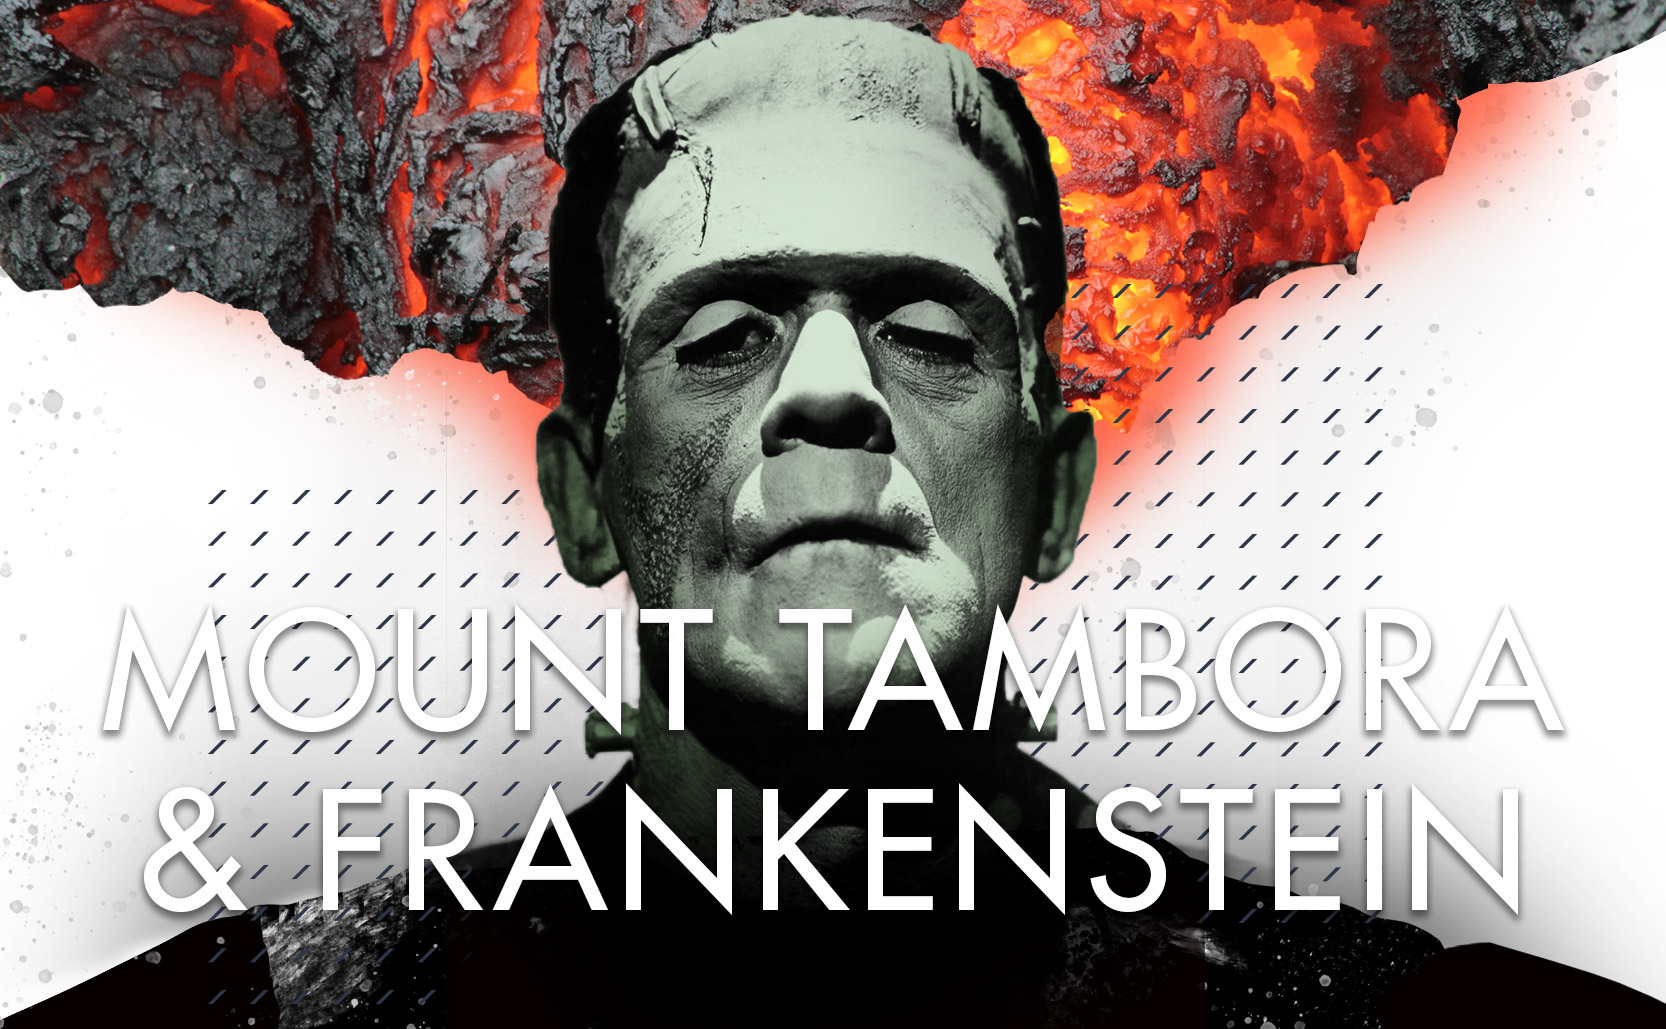 You are currently viewing Mount Tambora & Frankenstein